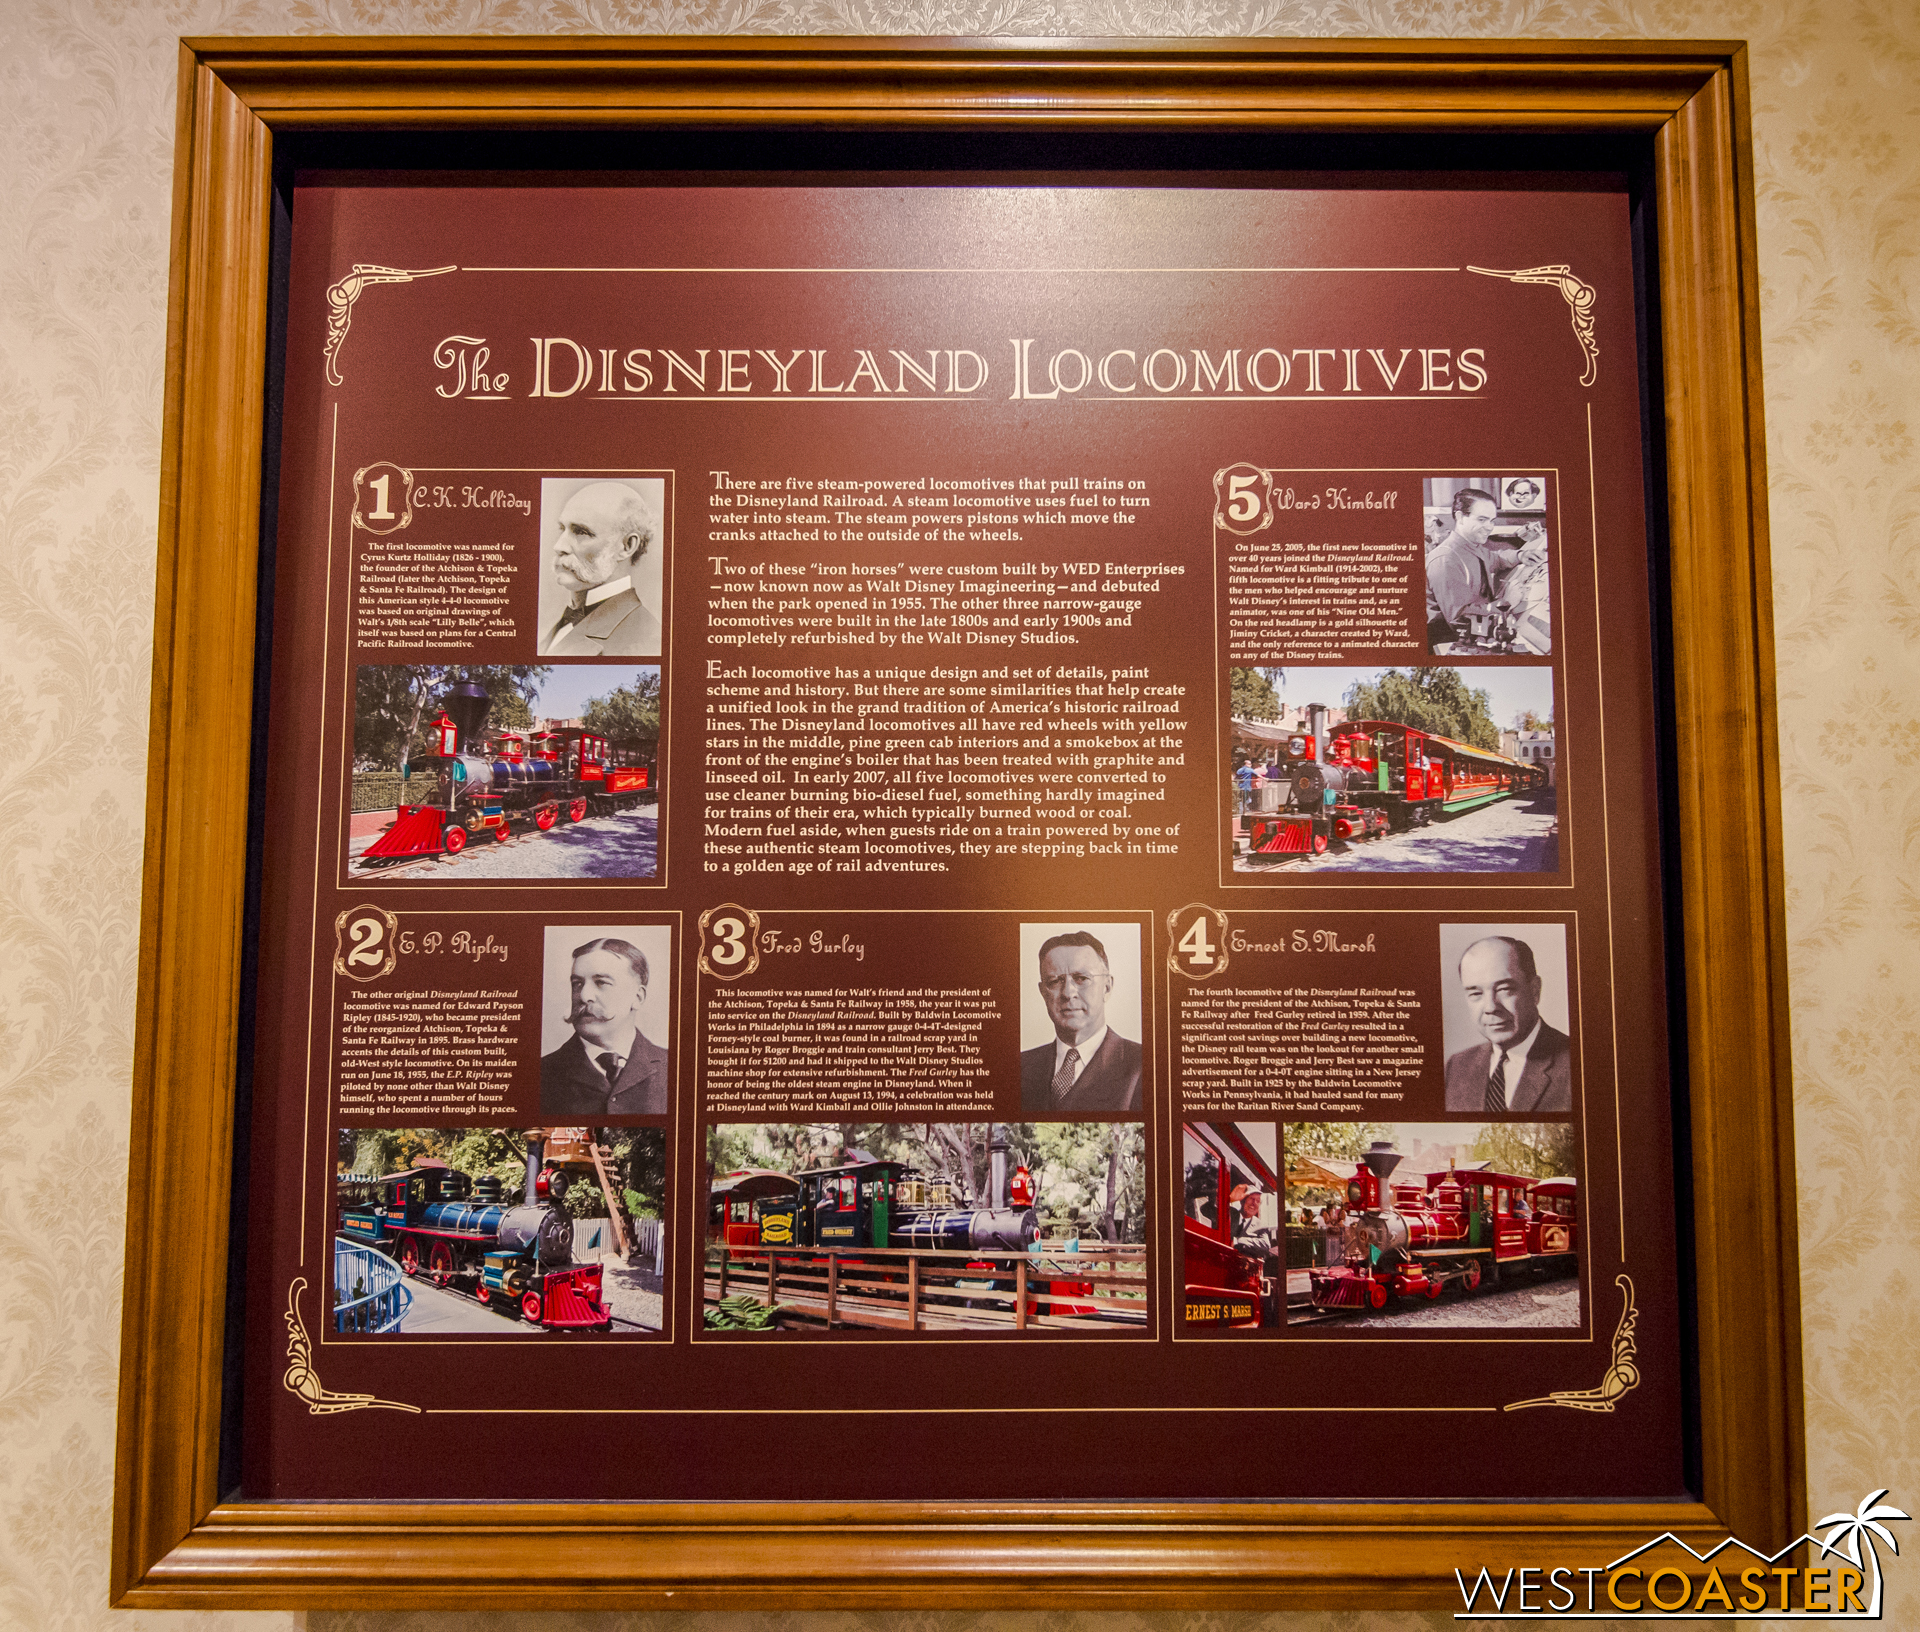  There's lots of great information on the trains at Disneyland. 